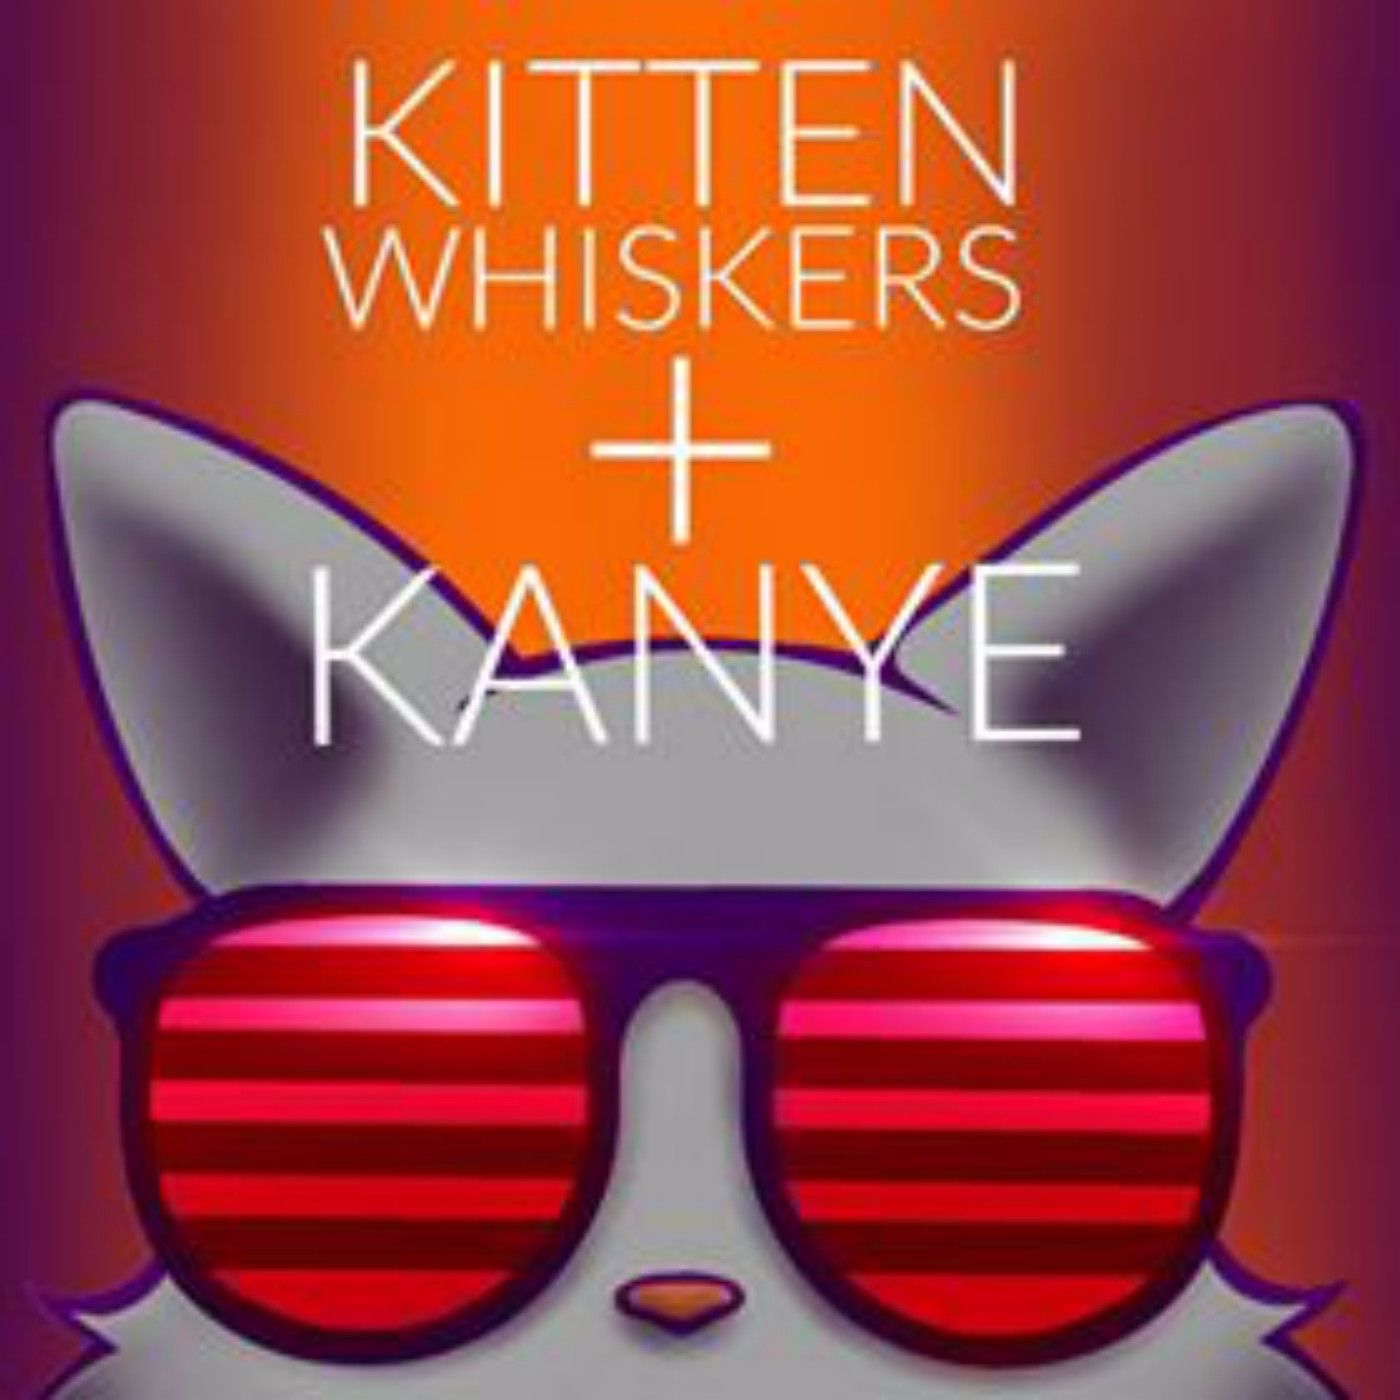 Kitten Whiskers and Kanye